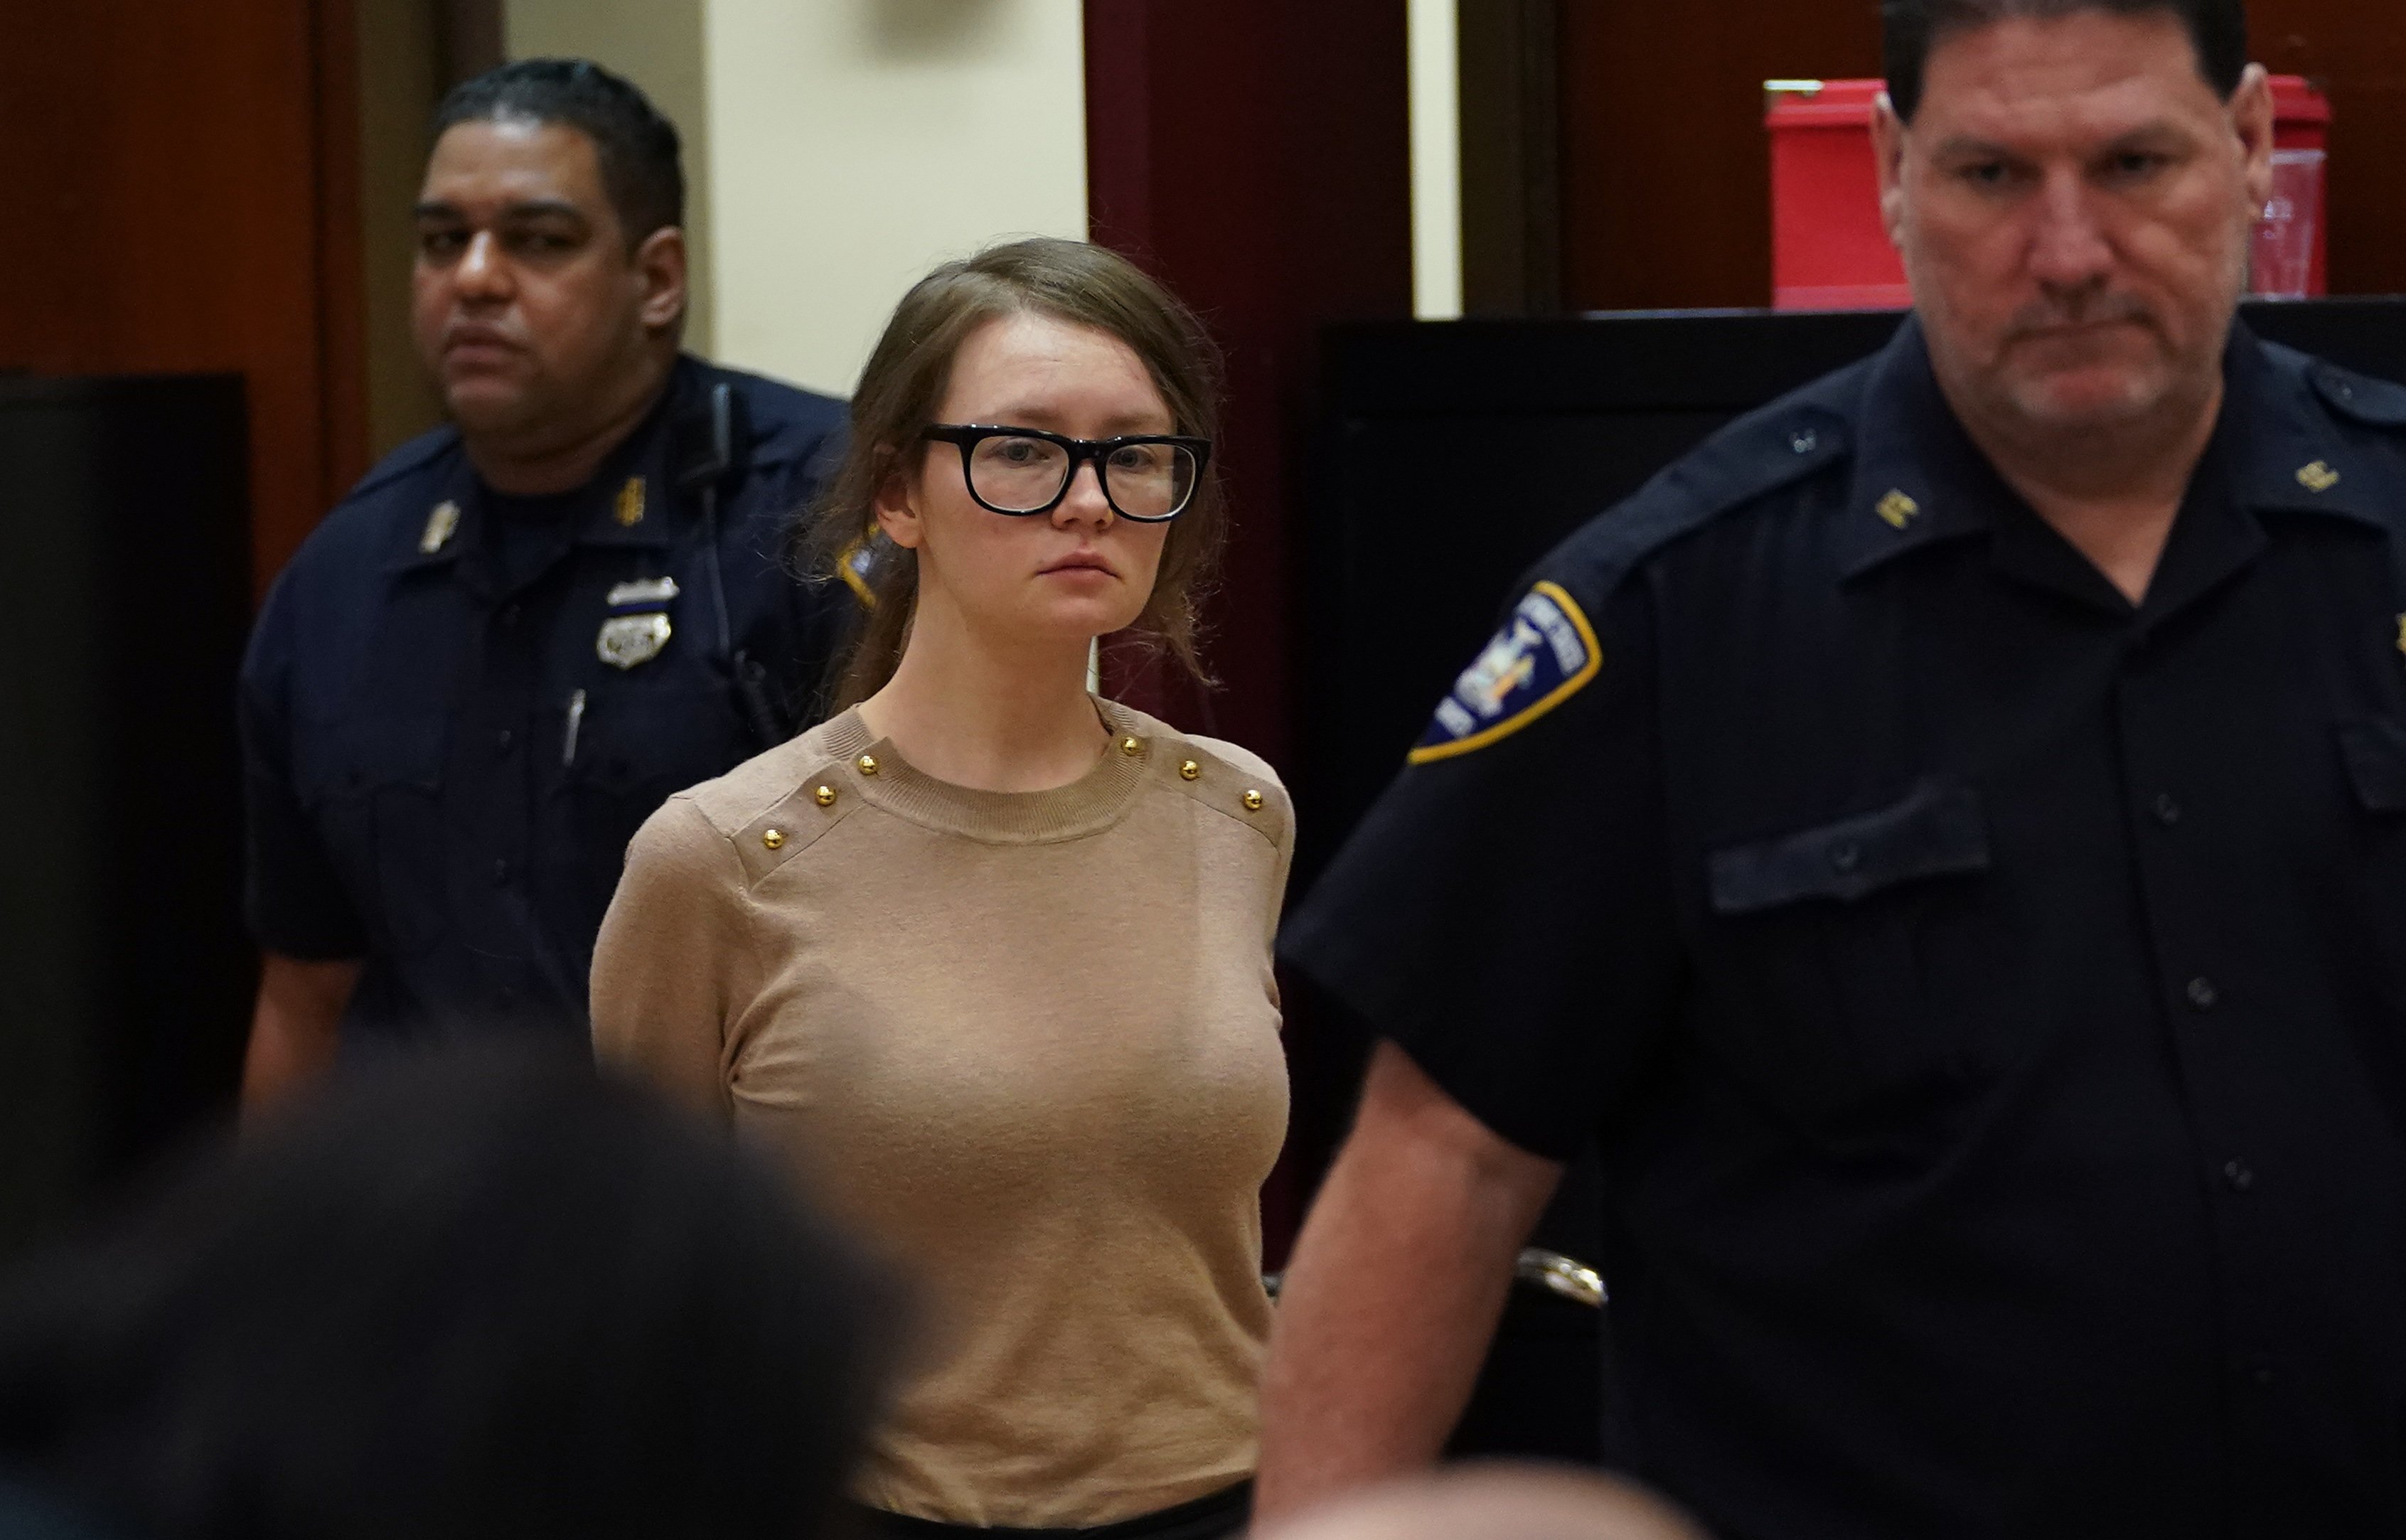 Anna Sorokin is seen in the courtroom during her trial at New York State Supreme Court | Source: Getty Images 